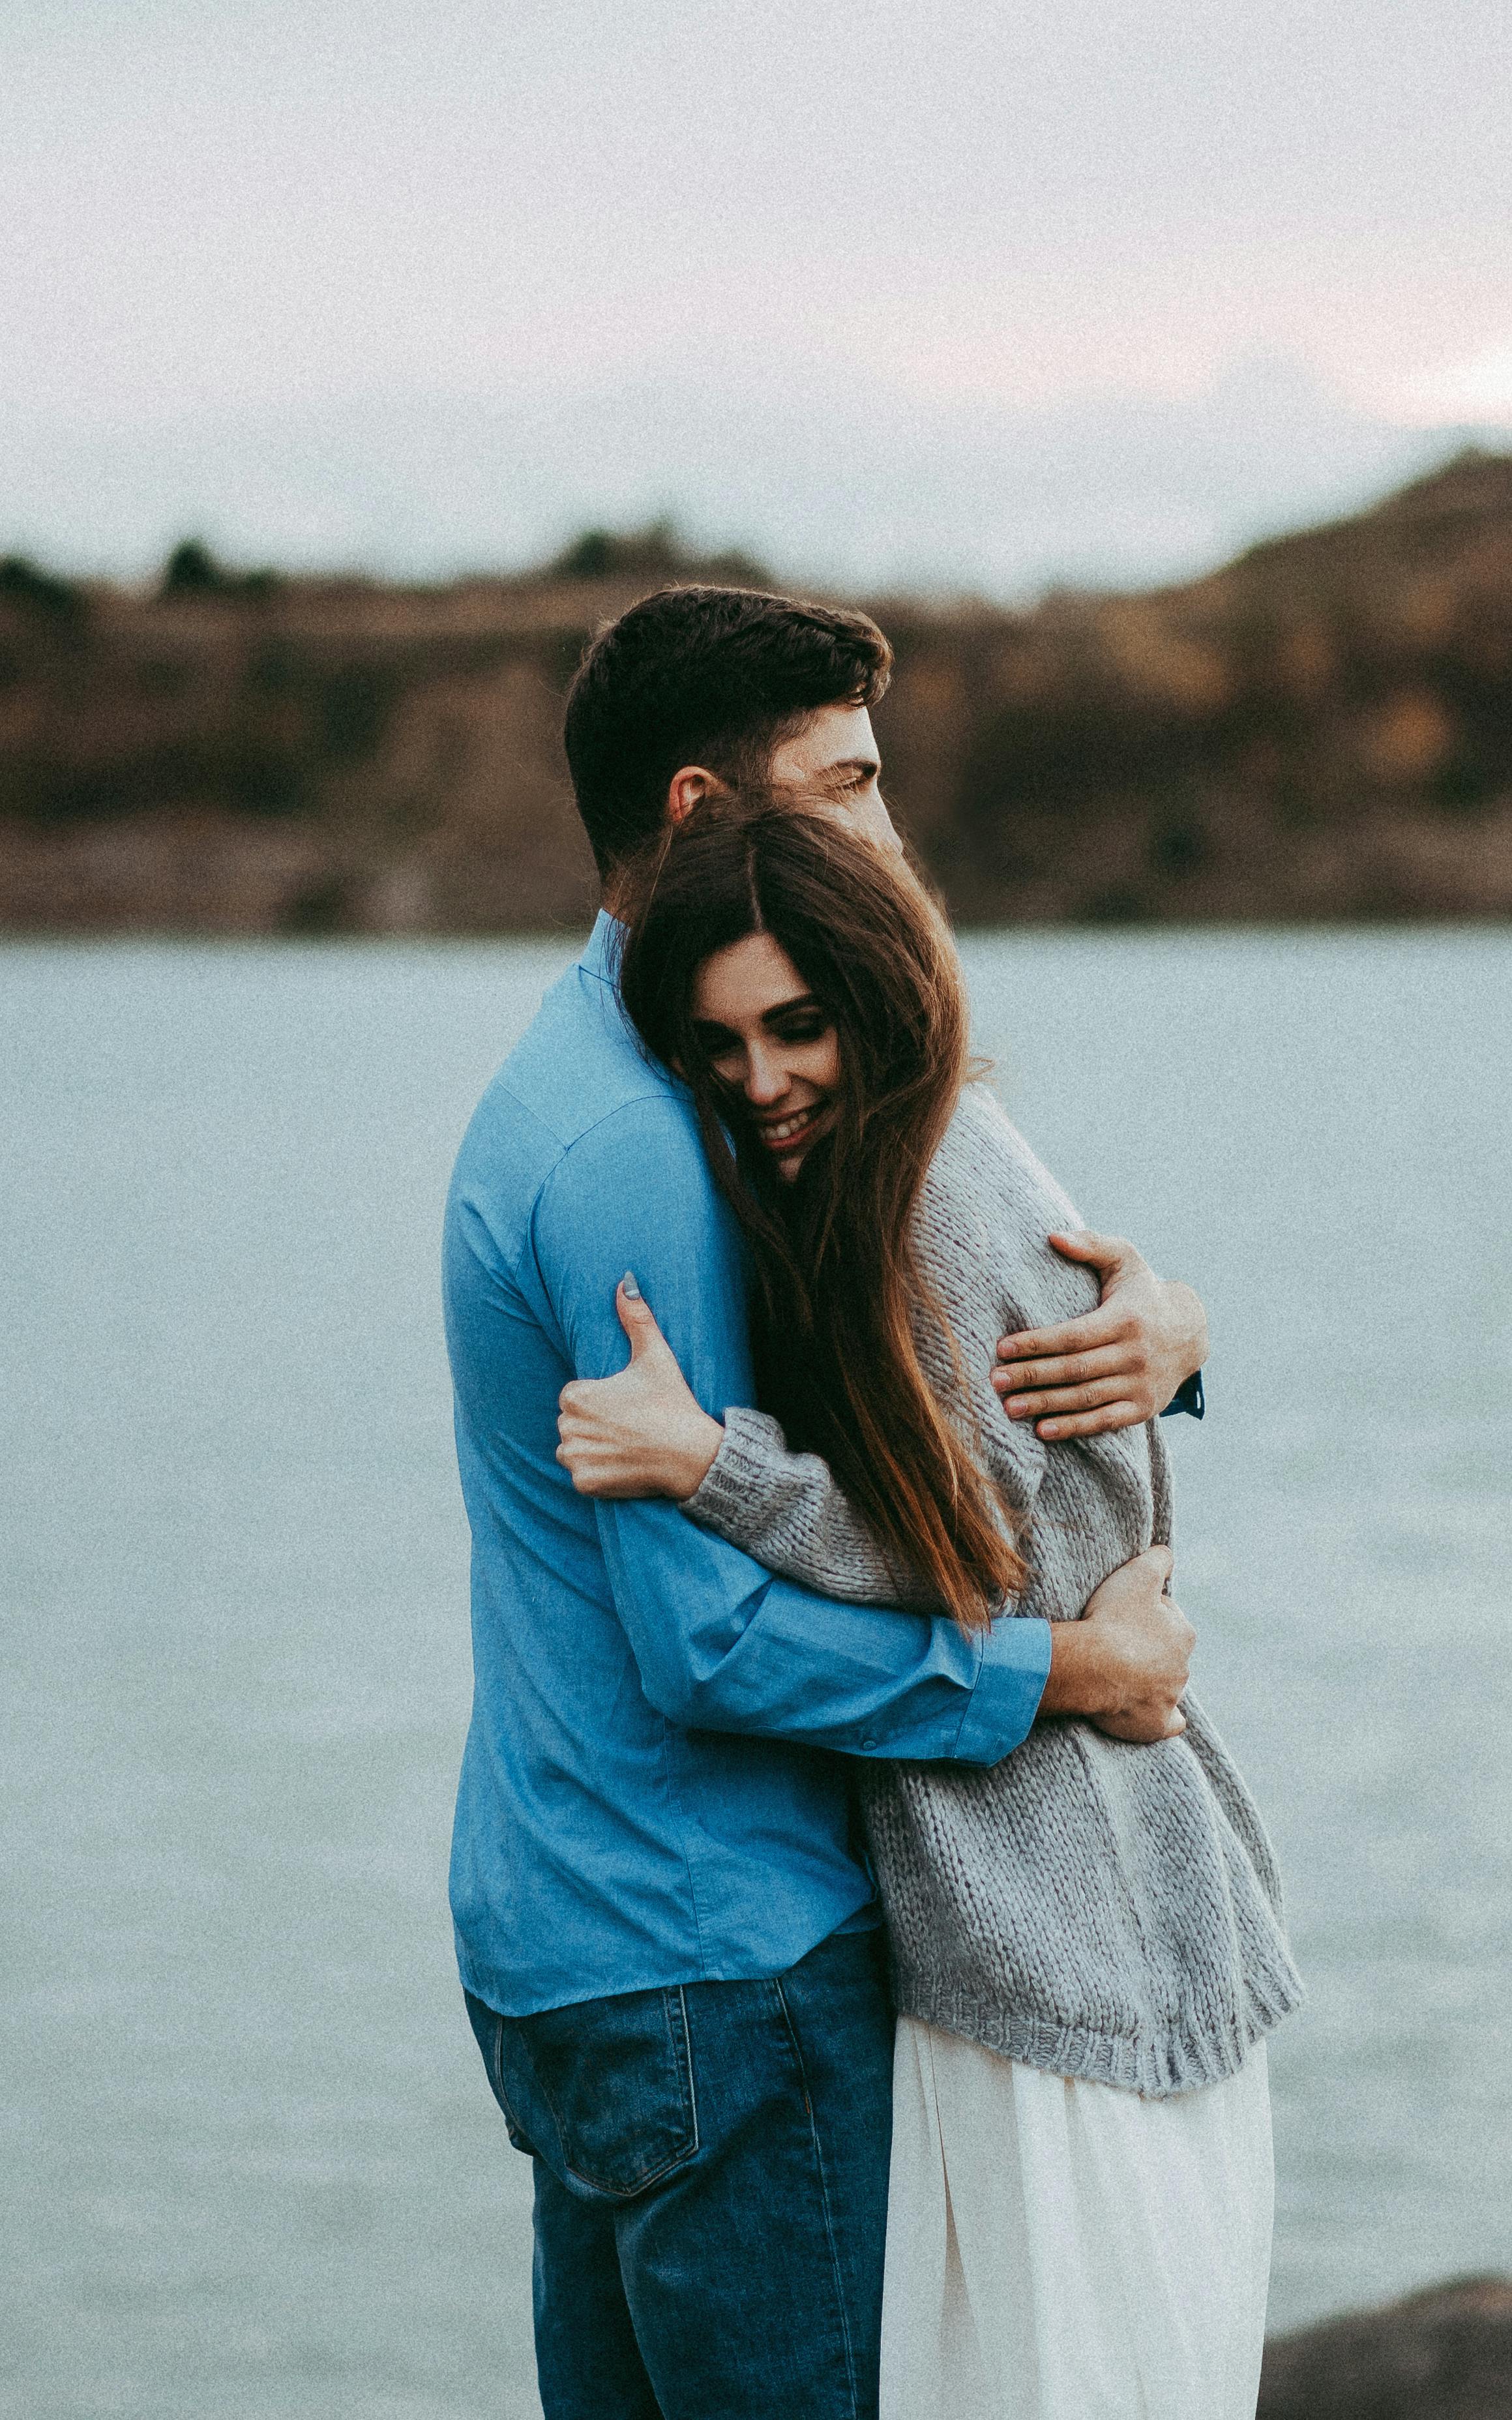 Man hugging a woman near a body of water. | Photo: Pexels